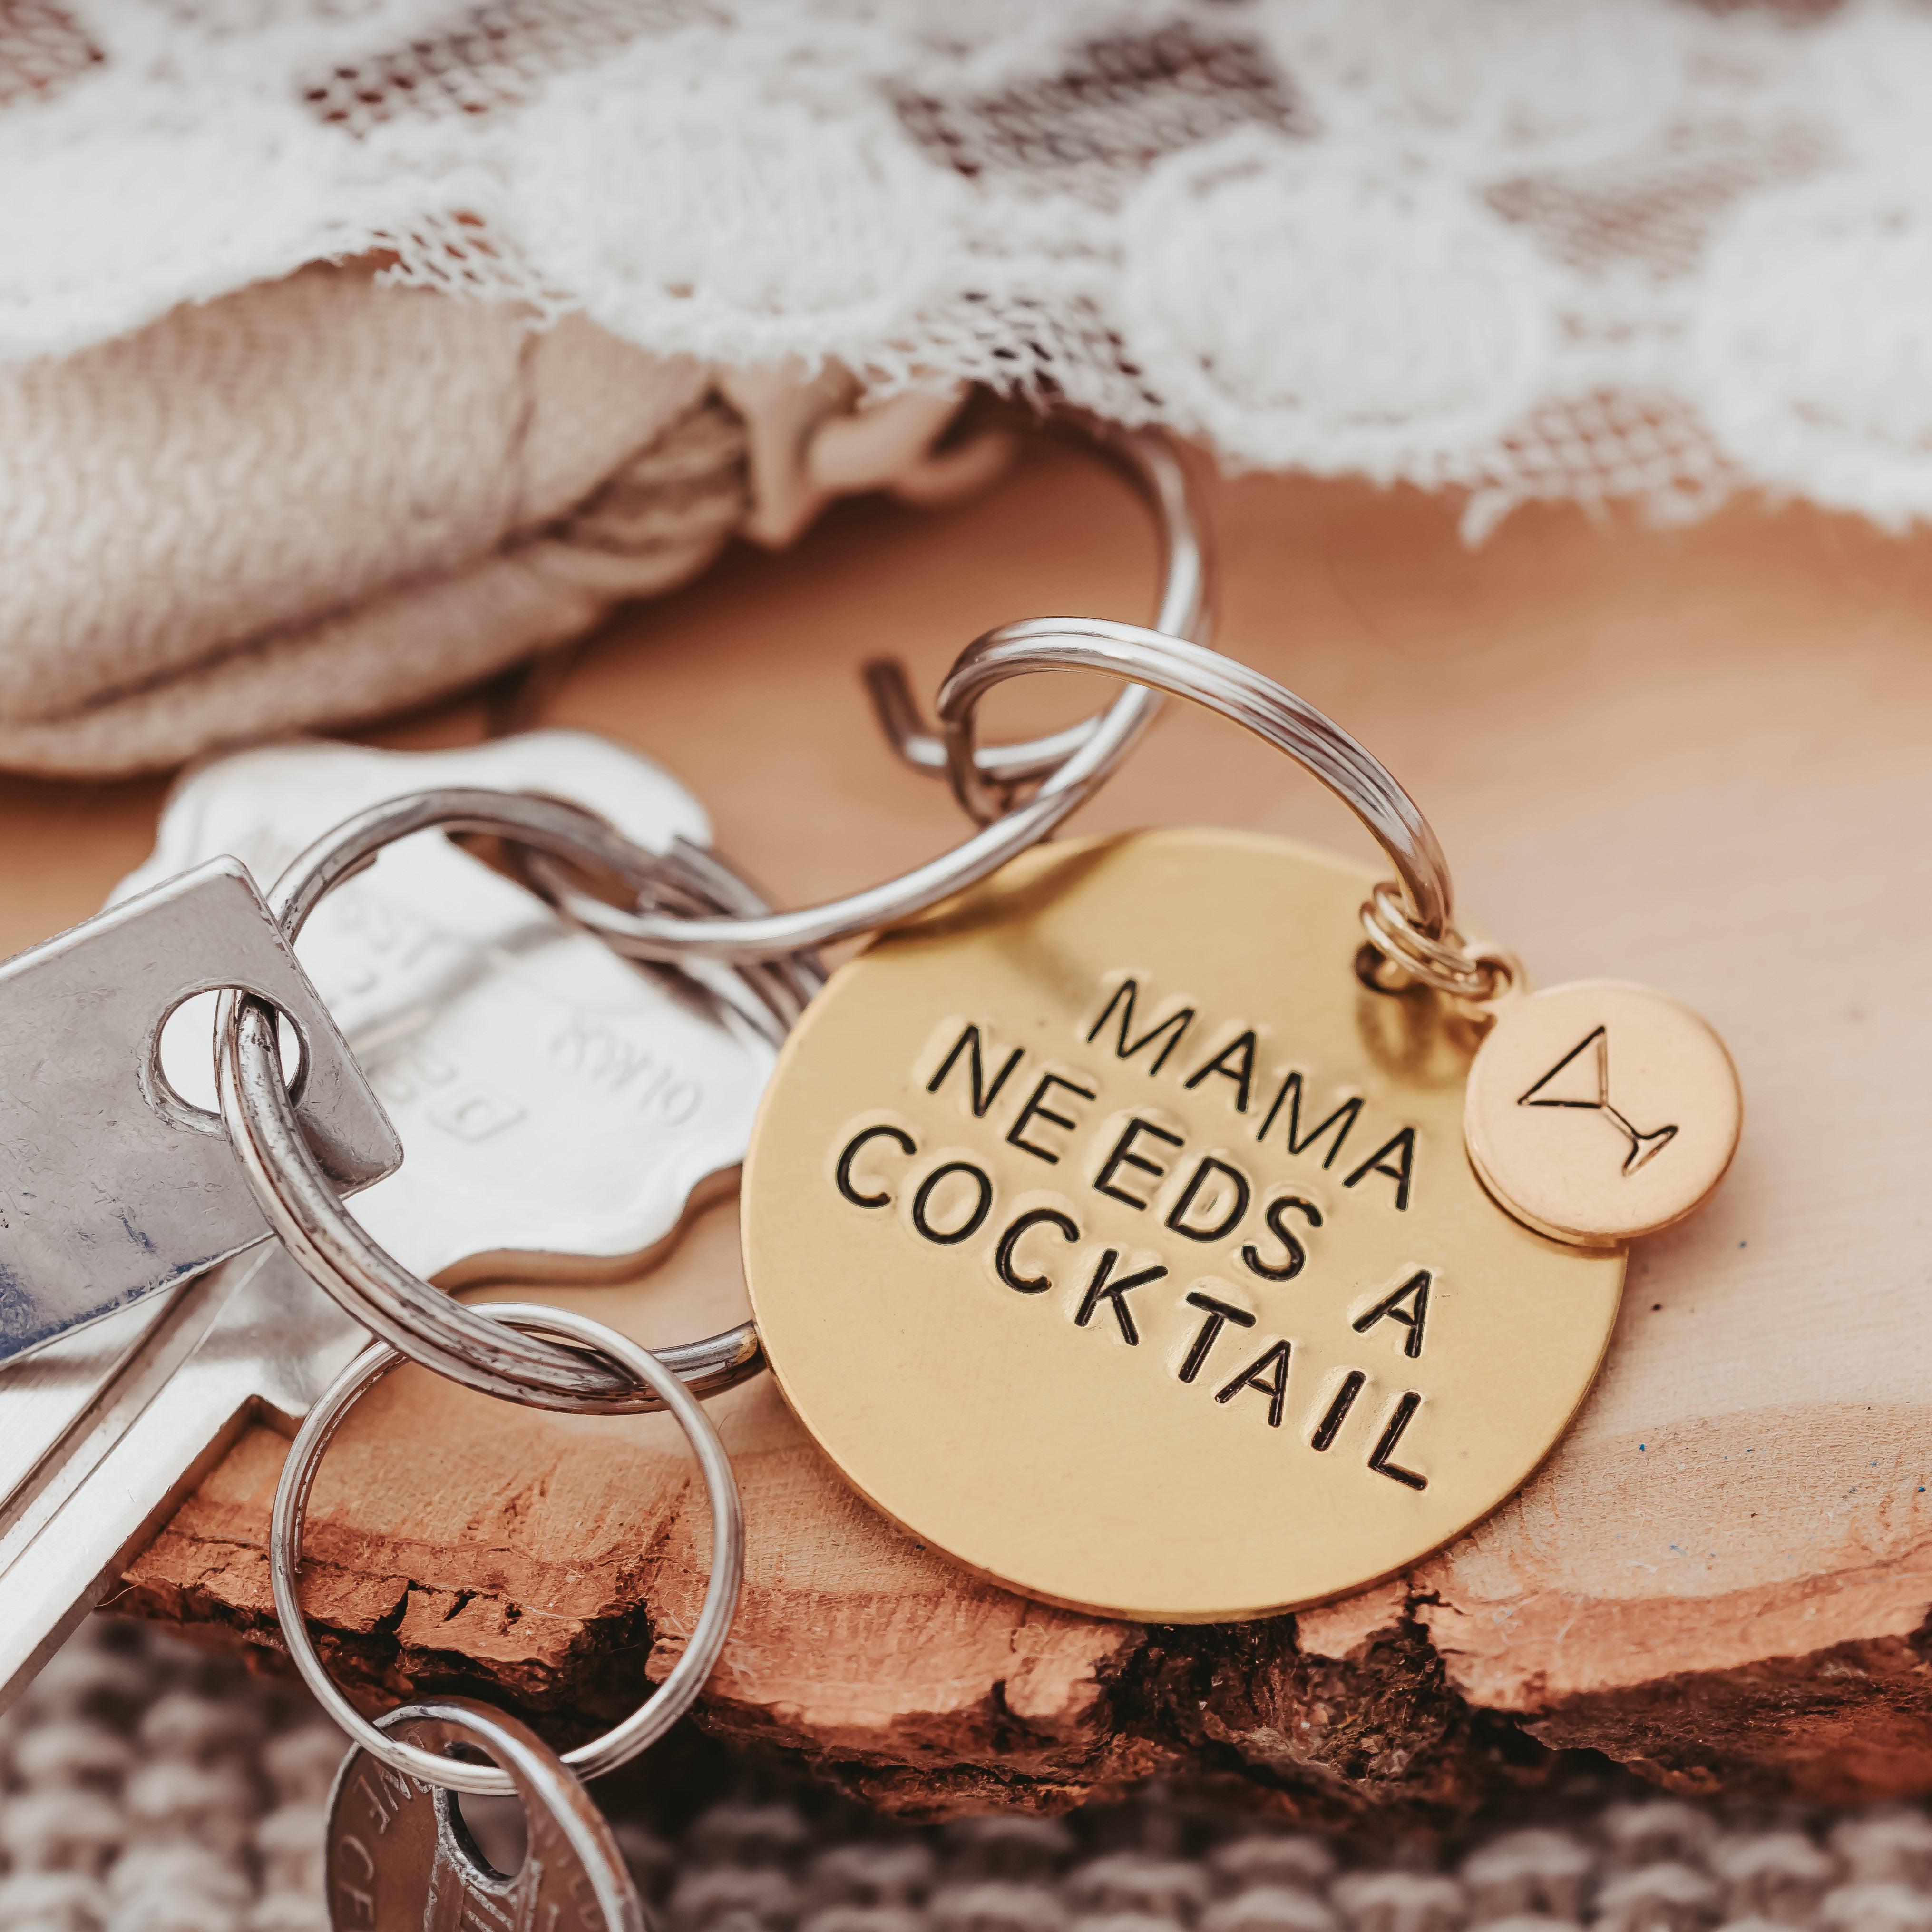 NOT YOUR BABY Brass Keychain Salt and Sparkle